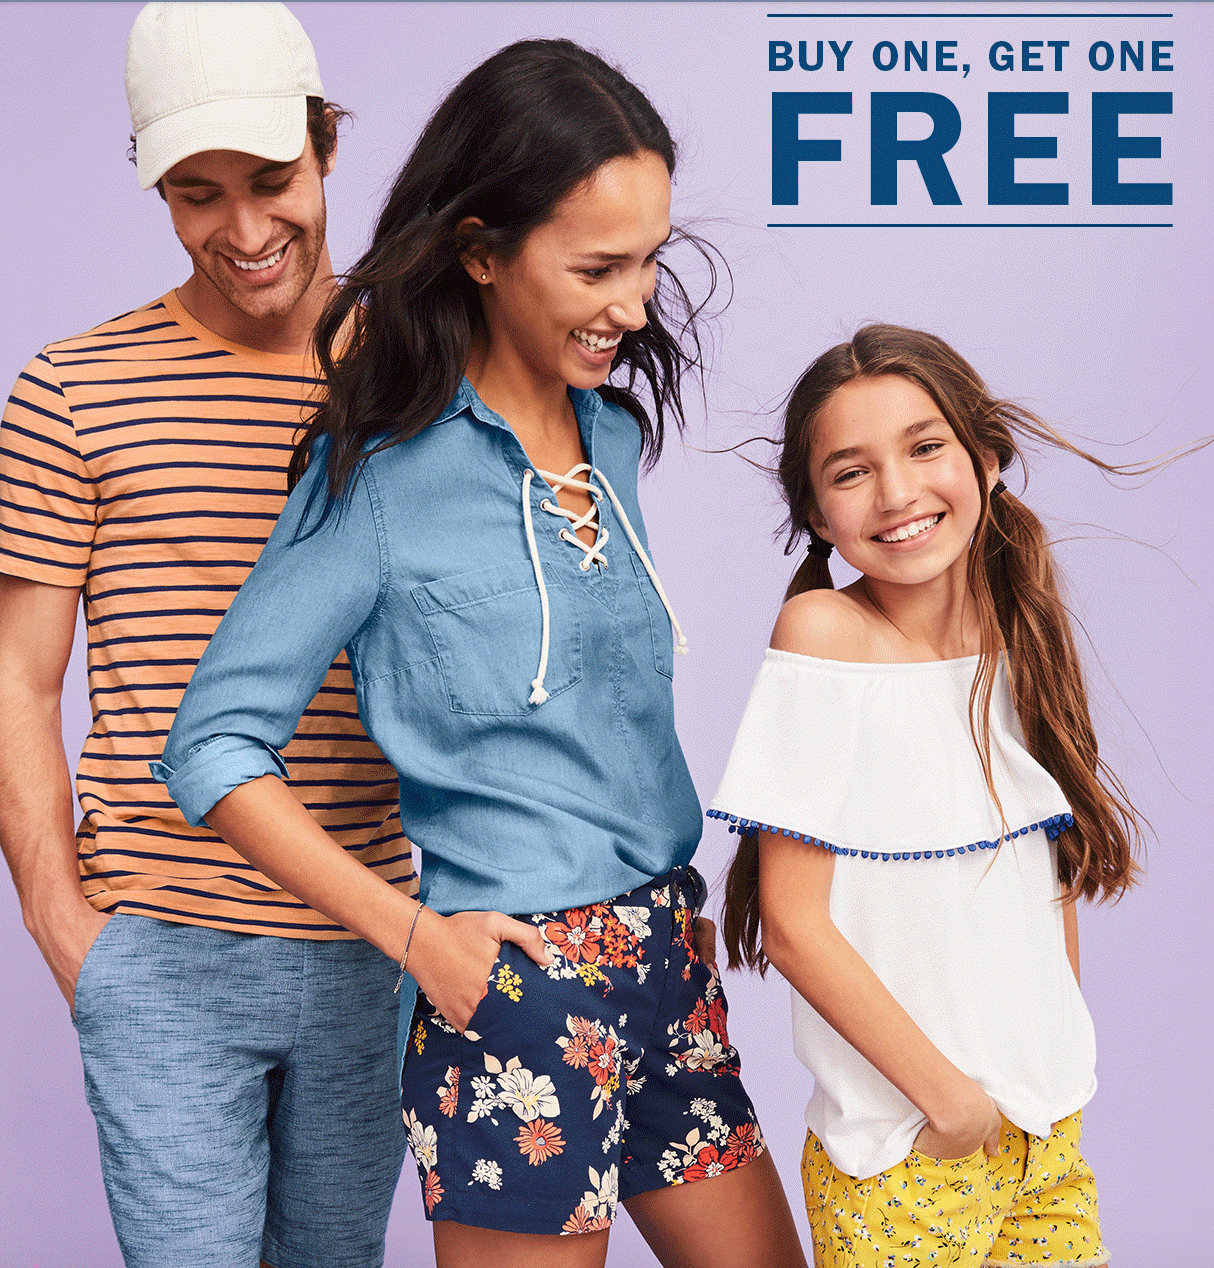 BOGO FREE On Shorts For The Whole Family Today Only At Old Navy! 